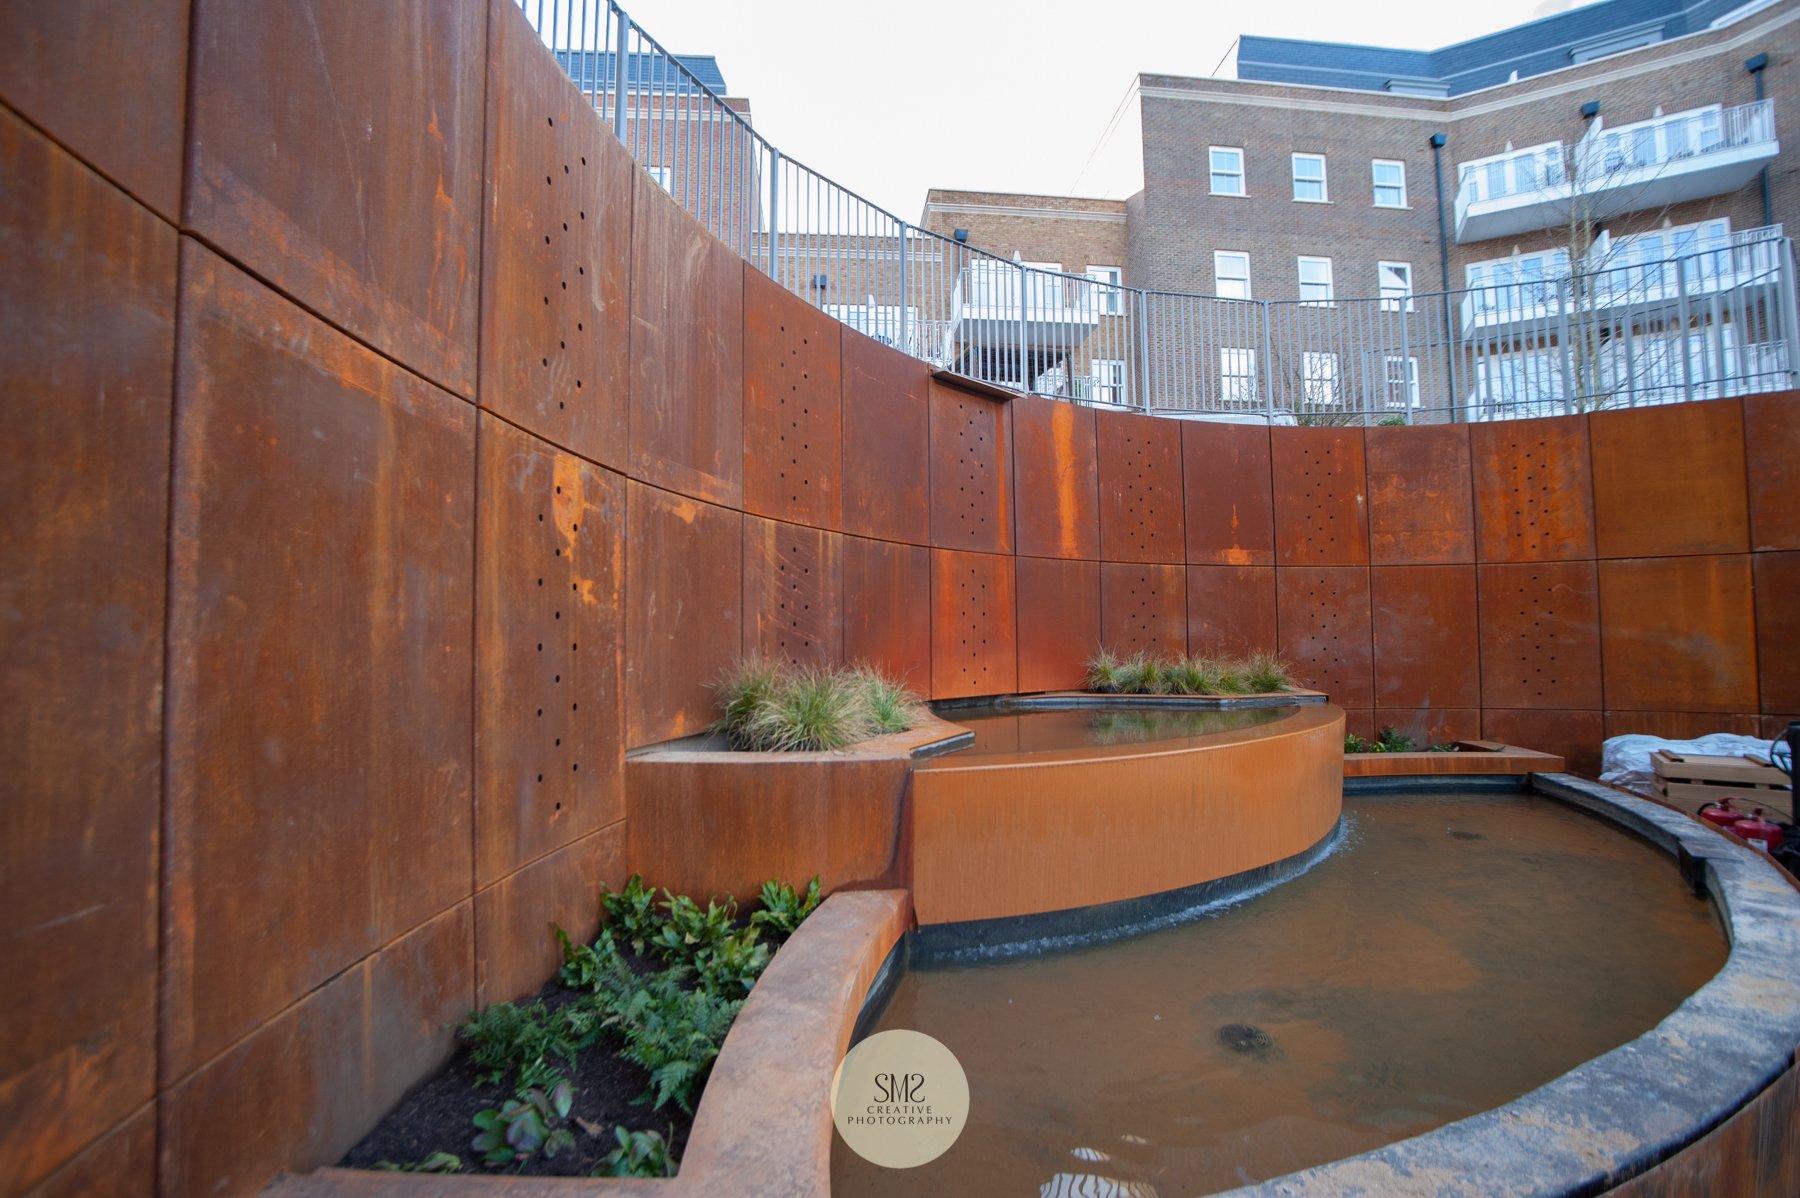  The water feature at the entrance to Courtyard Gardens depicts the finish of the gas holder that previously stood on this site. 